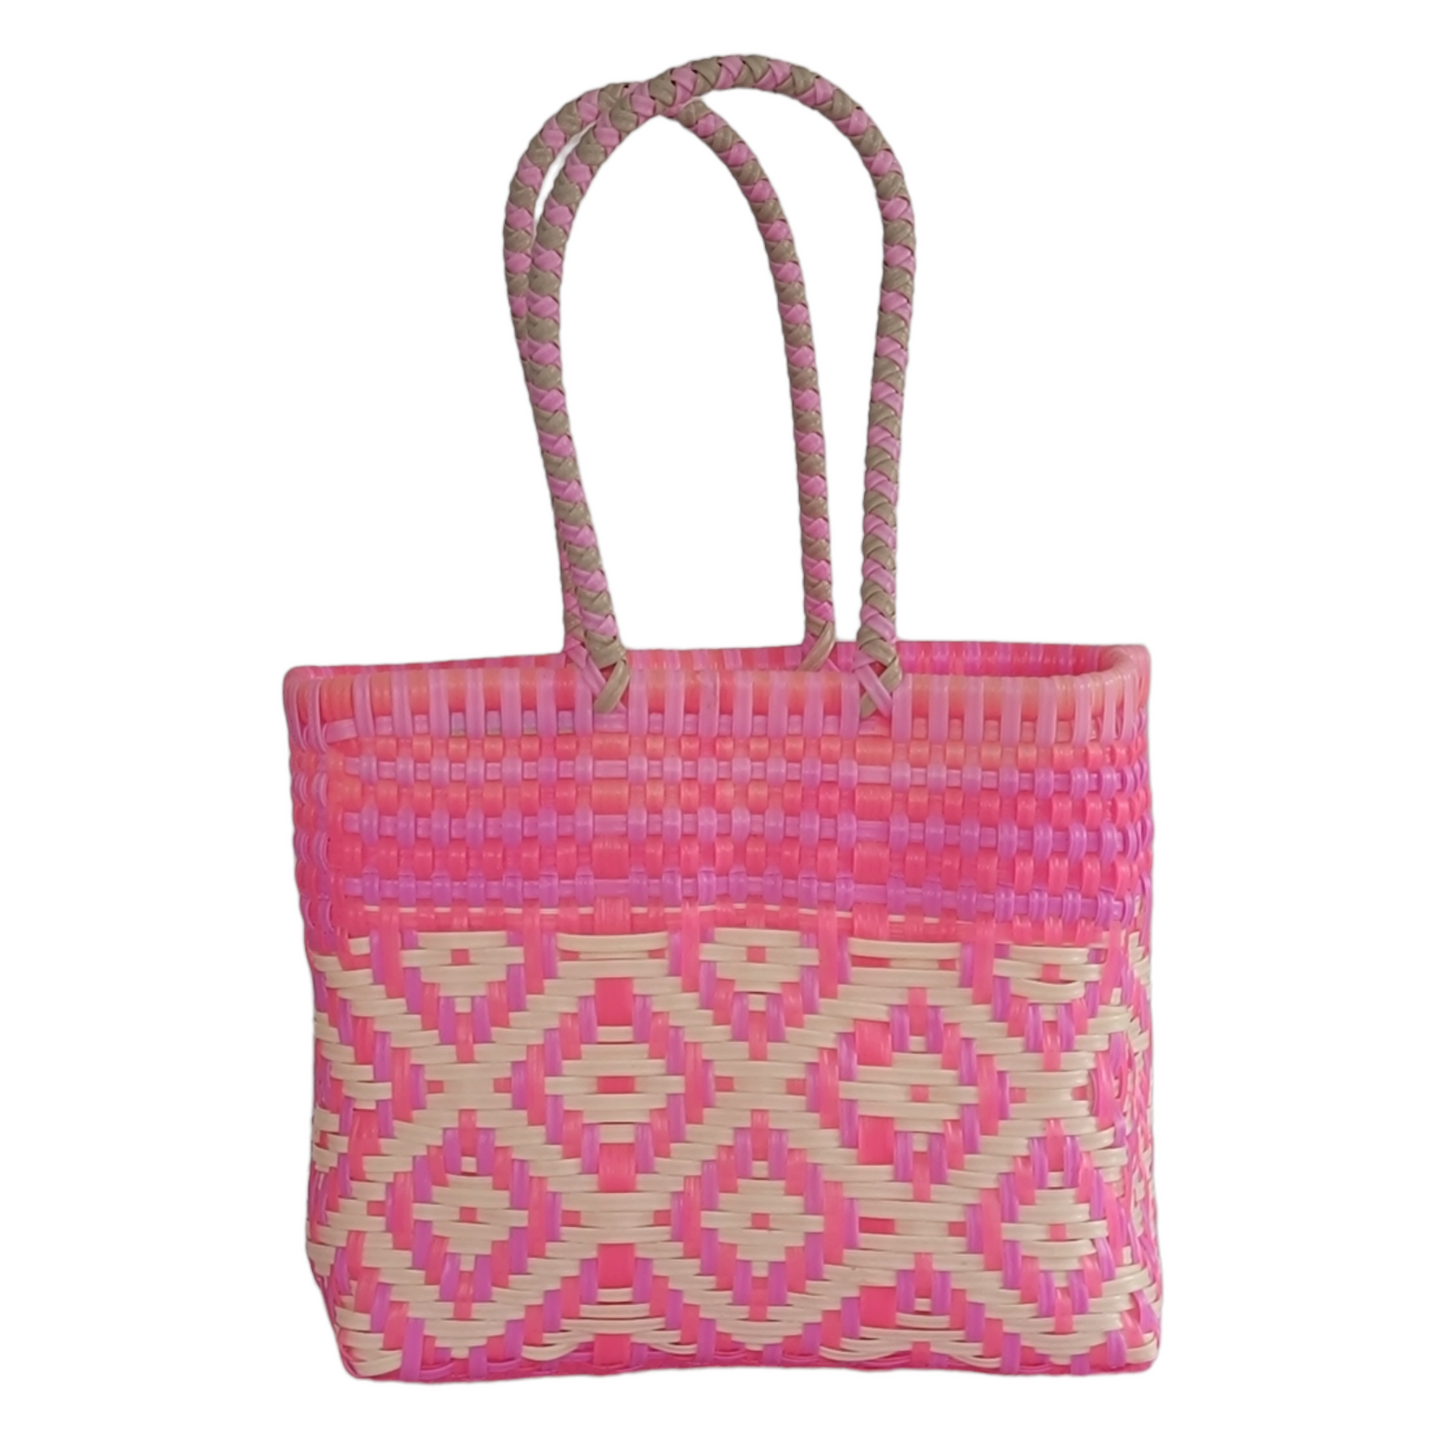 Barbie Mini Tote | Handwoven recycled